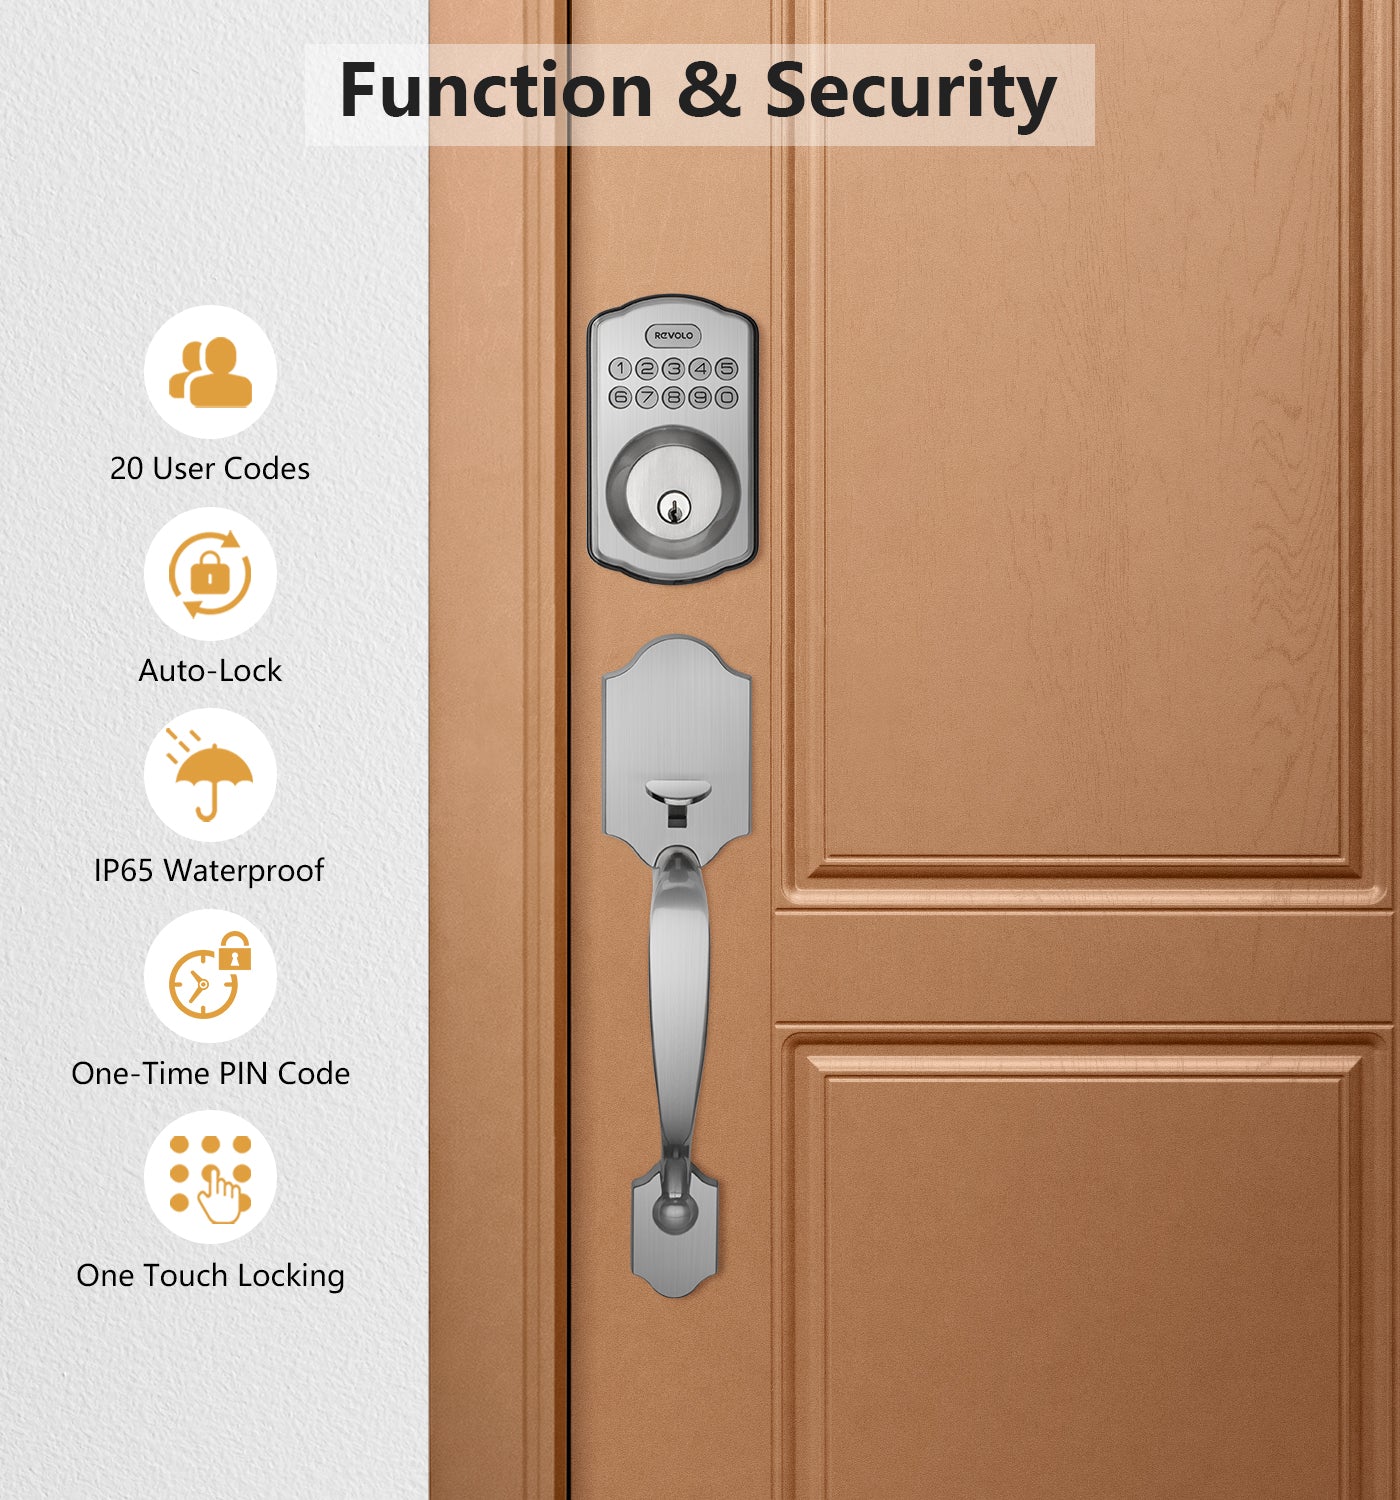 Revolo WFV01 Smart Lock with Camera, WiFi Smart Video Lock, Keyless Entry Door Lock, Doorbell Camera Wireless with Chime, Supports App Control, 1080P - 2